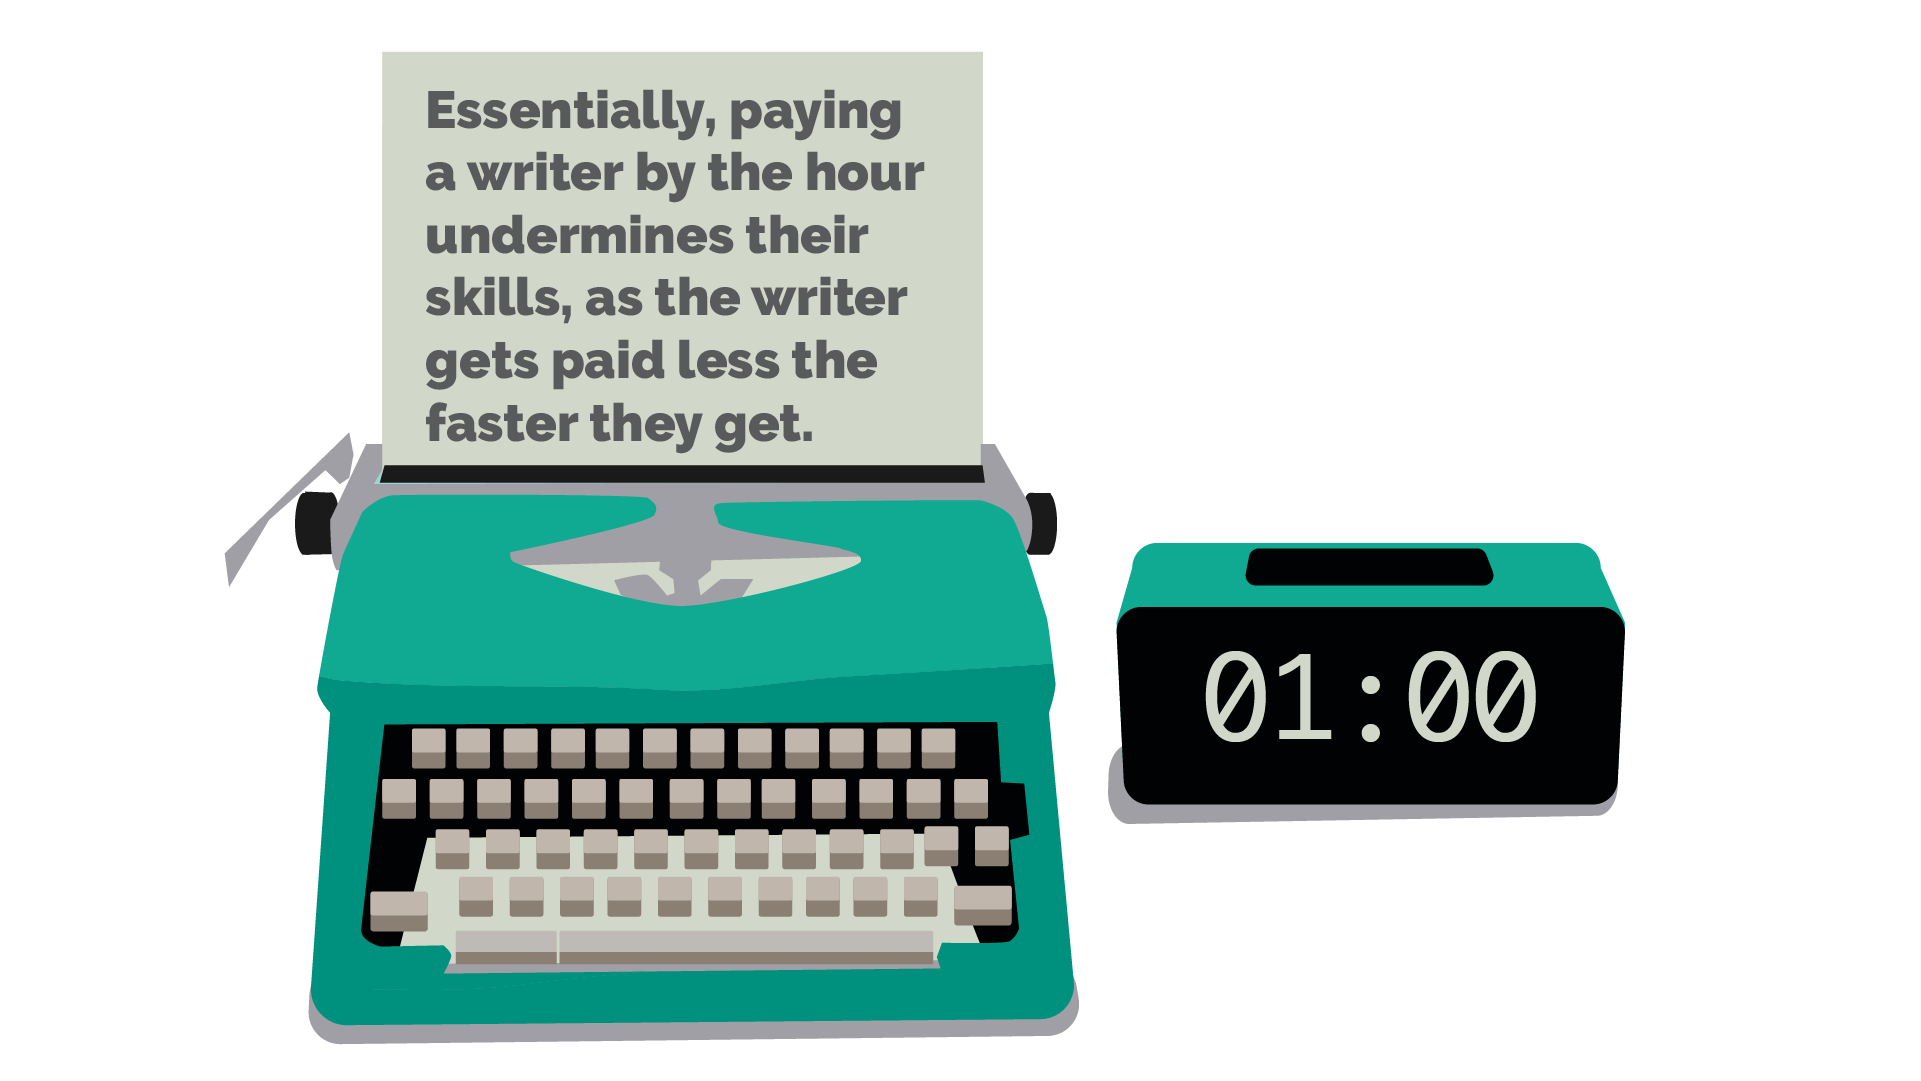 Typewriter with text, "Essentially, paying a writer by the hour undermines their skills, as the writer gets paid less the faster they get.” 